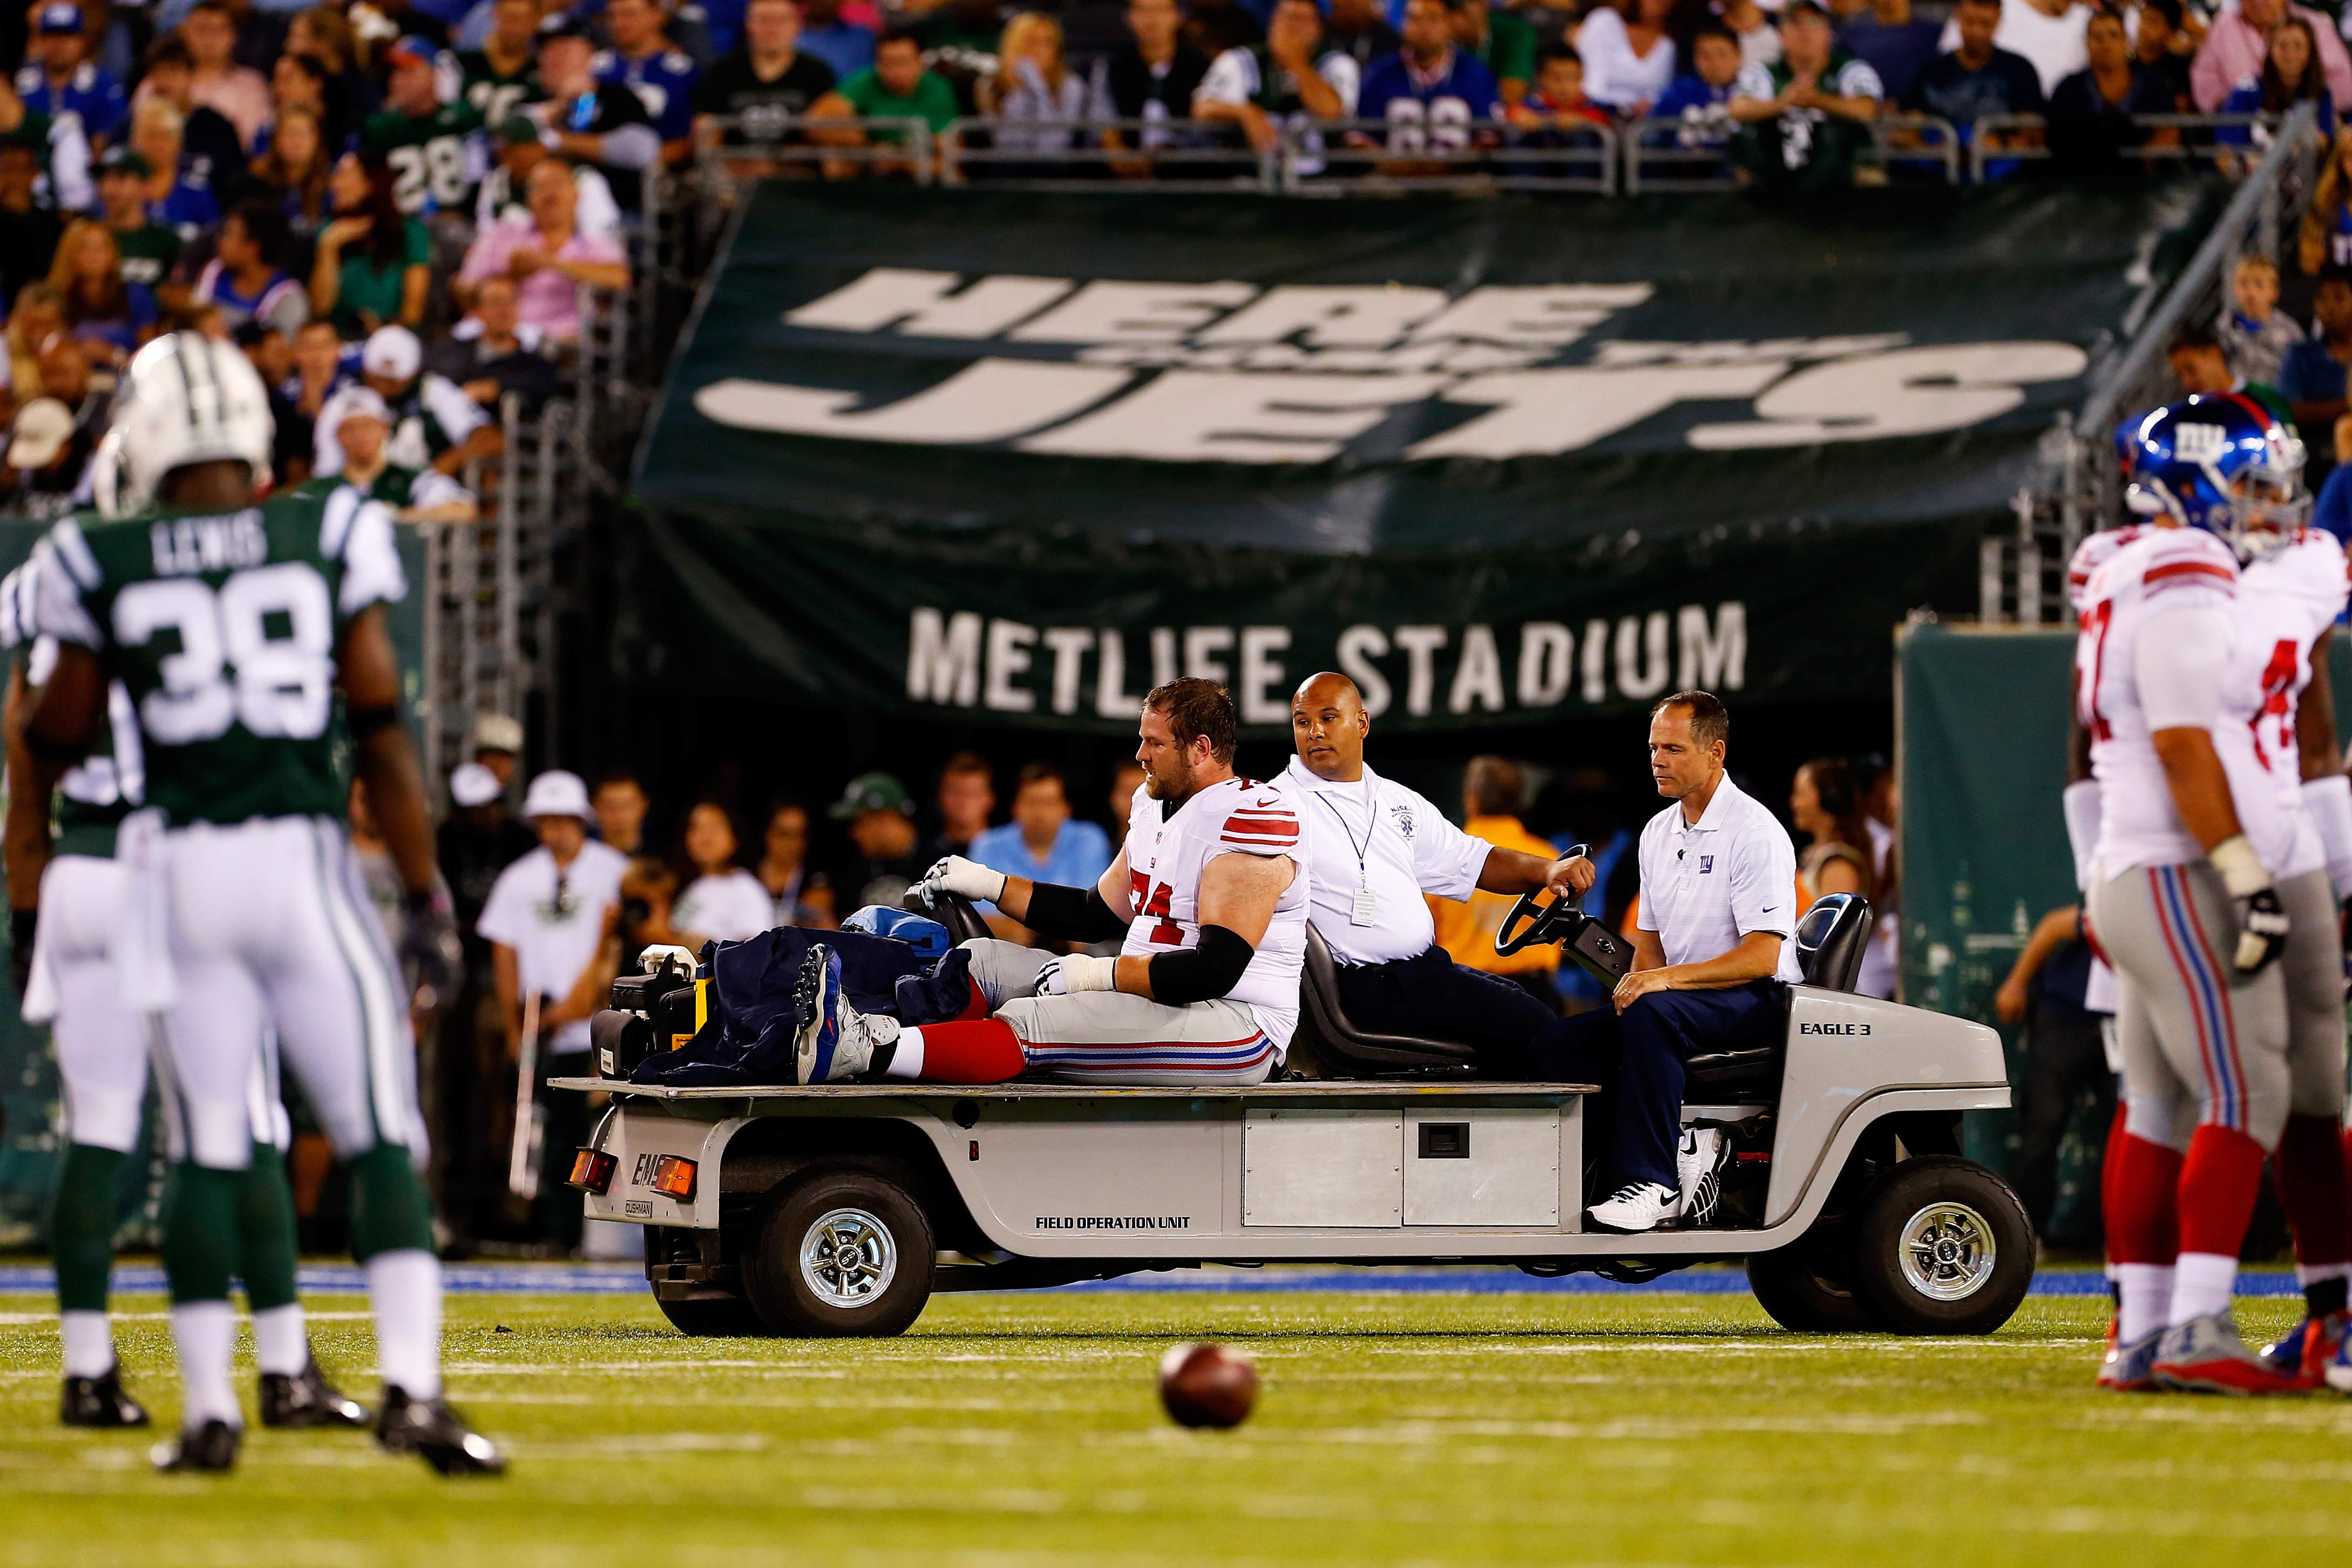 Geoff Schwartz being carted off during a preseason game against the Jets